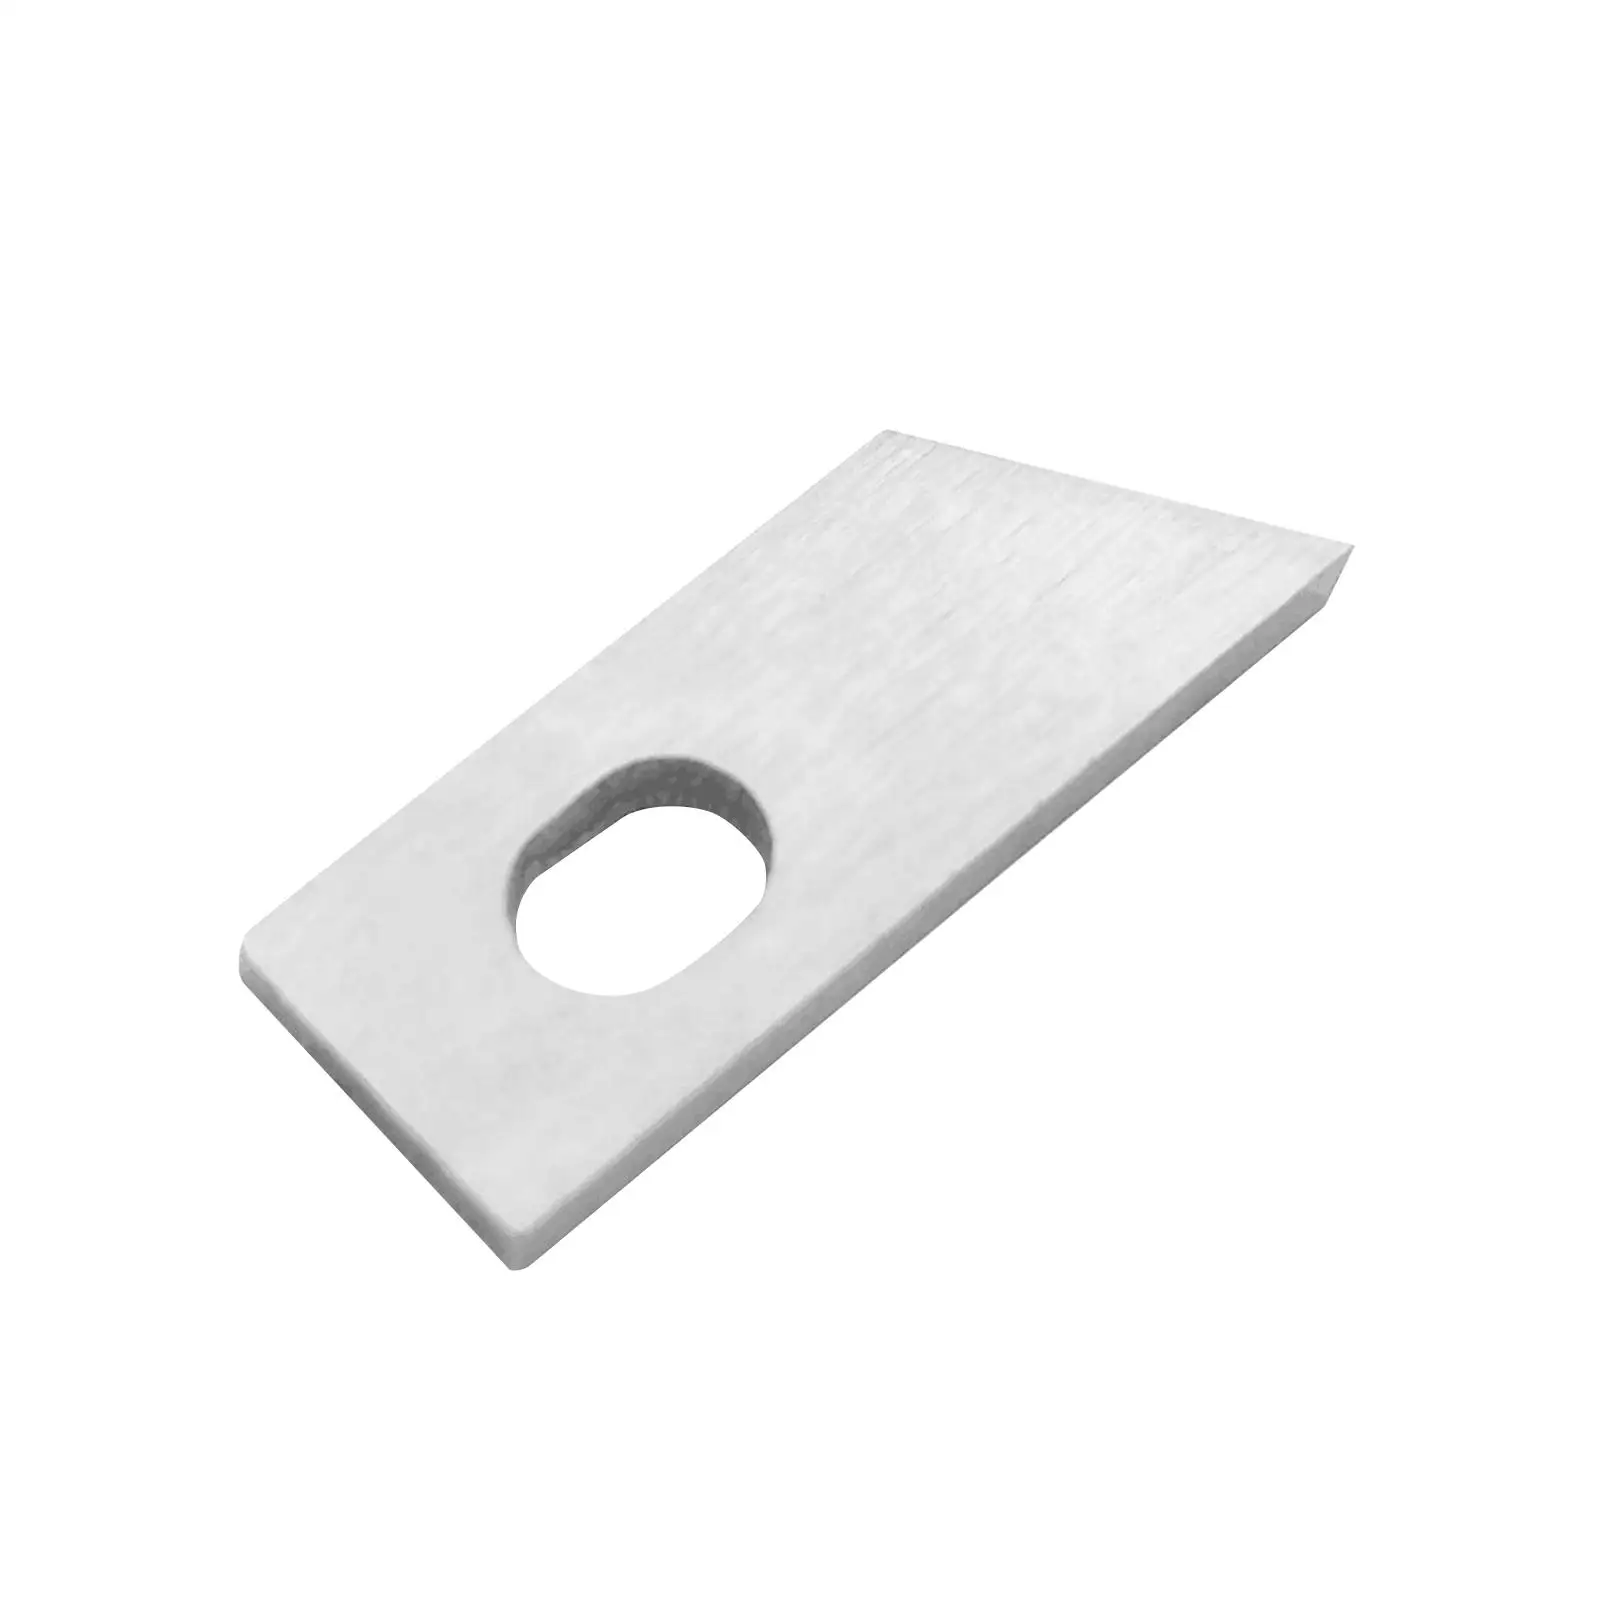 Lower Knife Blade 141000331 Sturdy Smooth Cutting Part Household Accessory Overlock Knife for White 1634D 1500 1600 1634 Serger